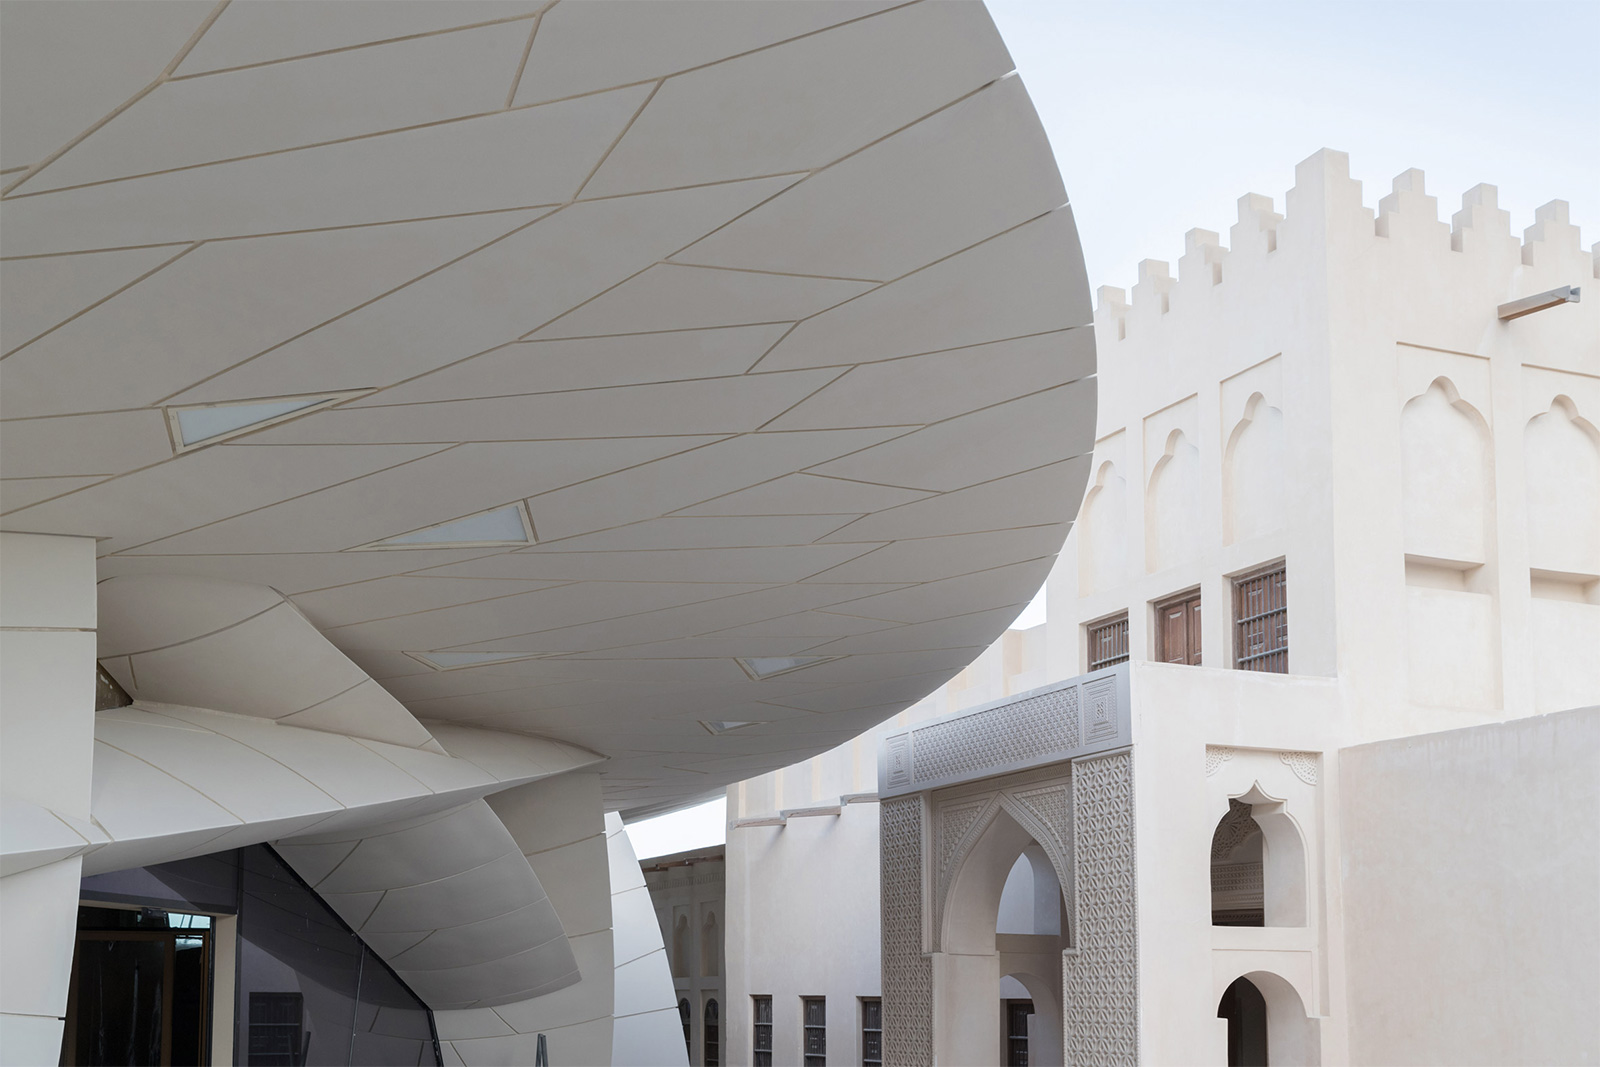 National Museum of Qatar opened on 28 March 2019